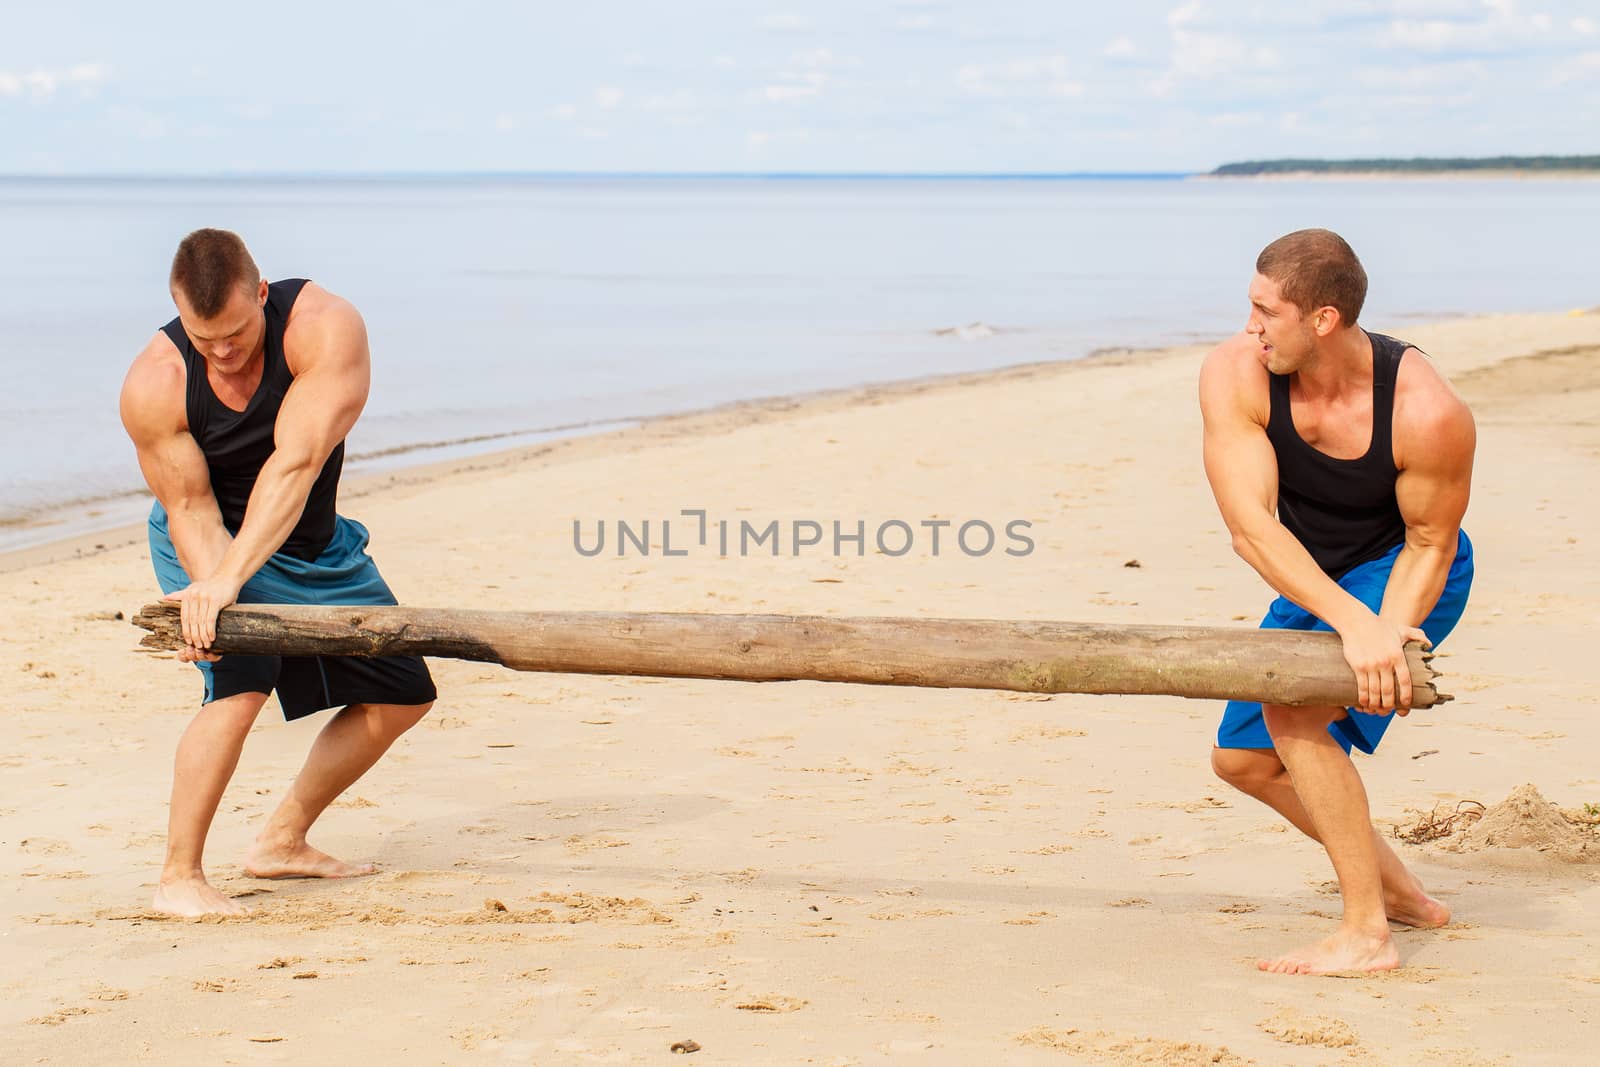 Sport, fitness. Bodybuilders during workout on the beach